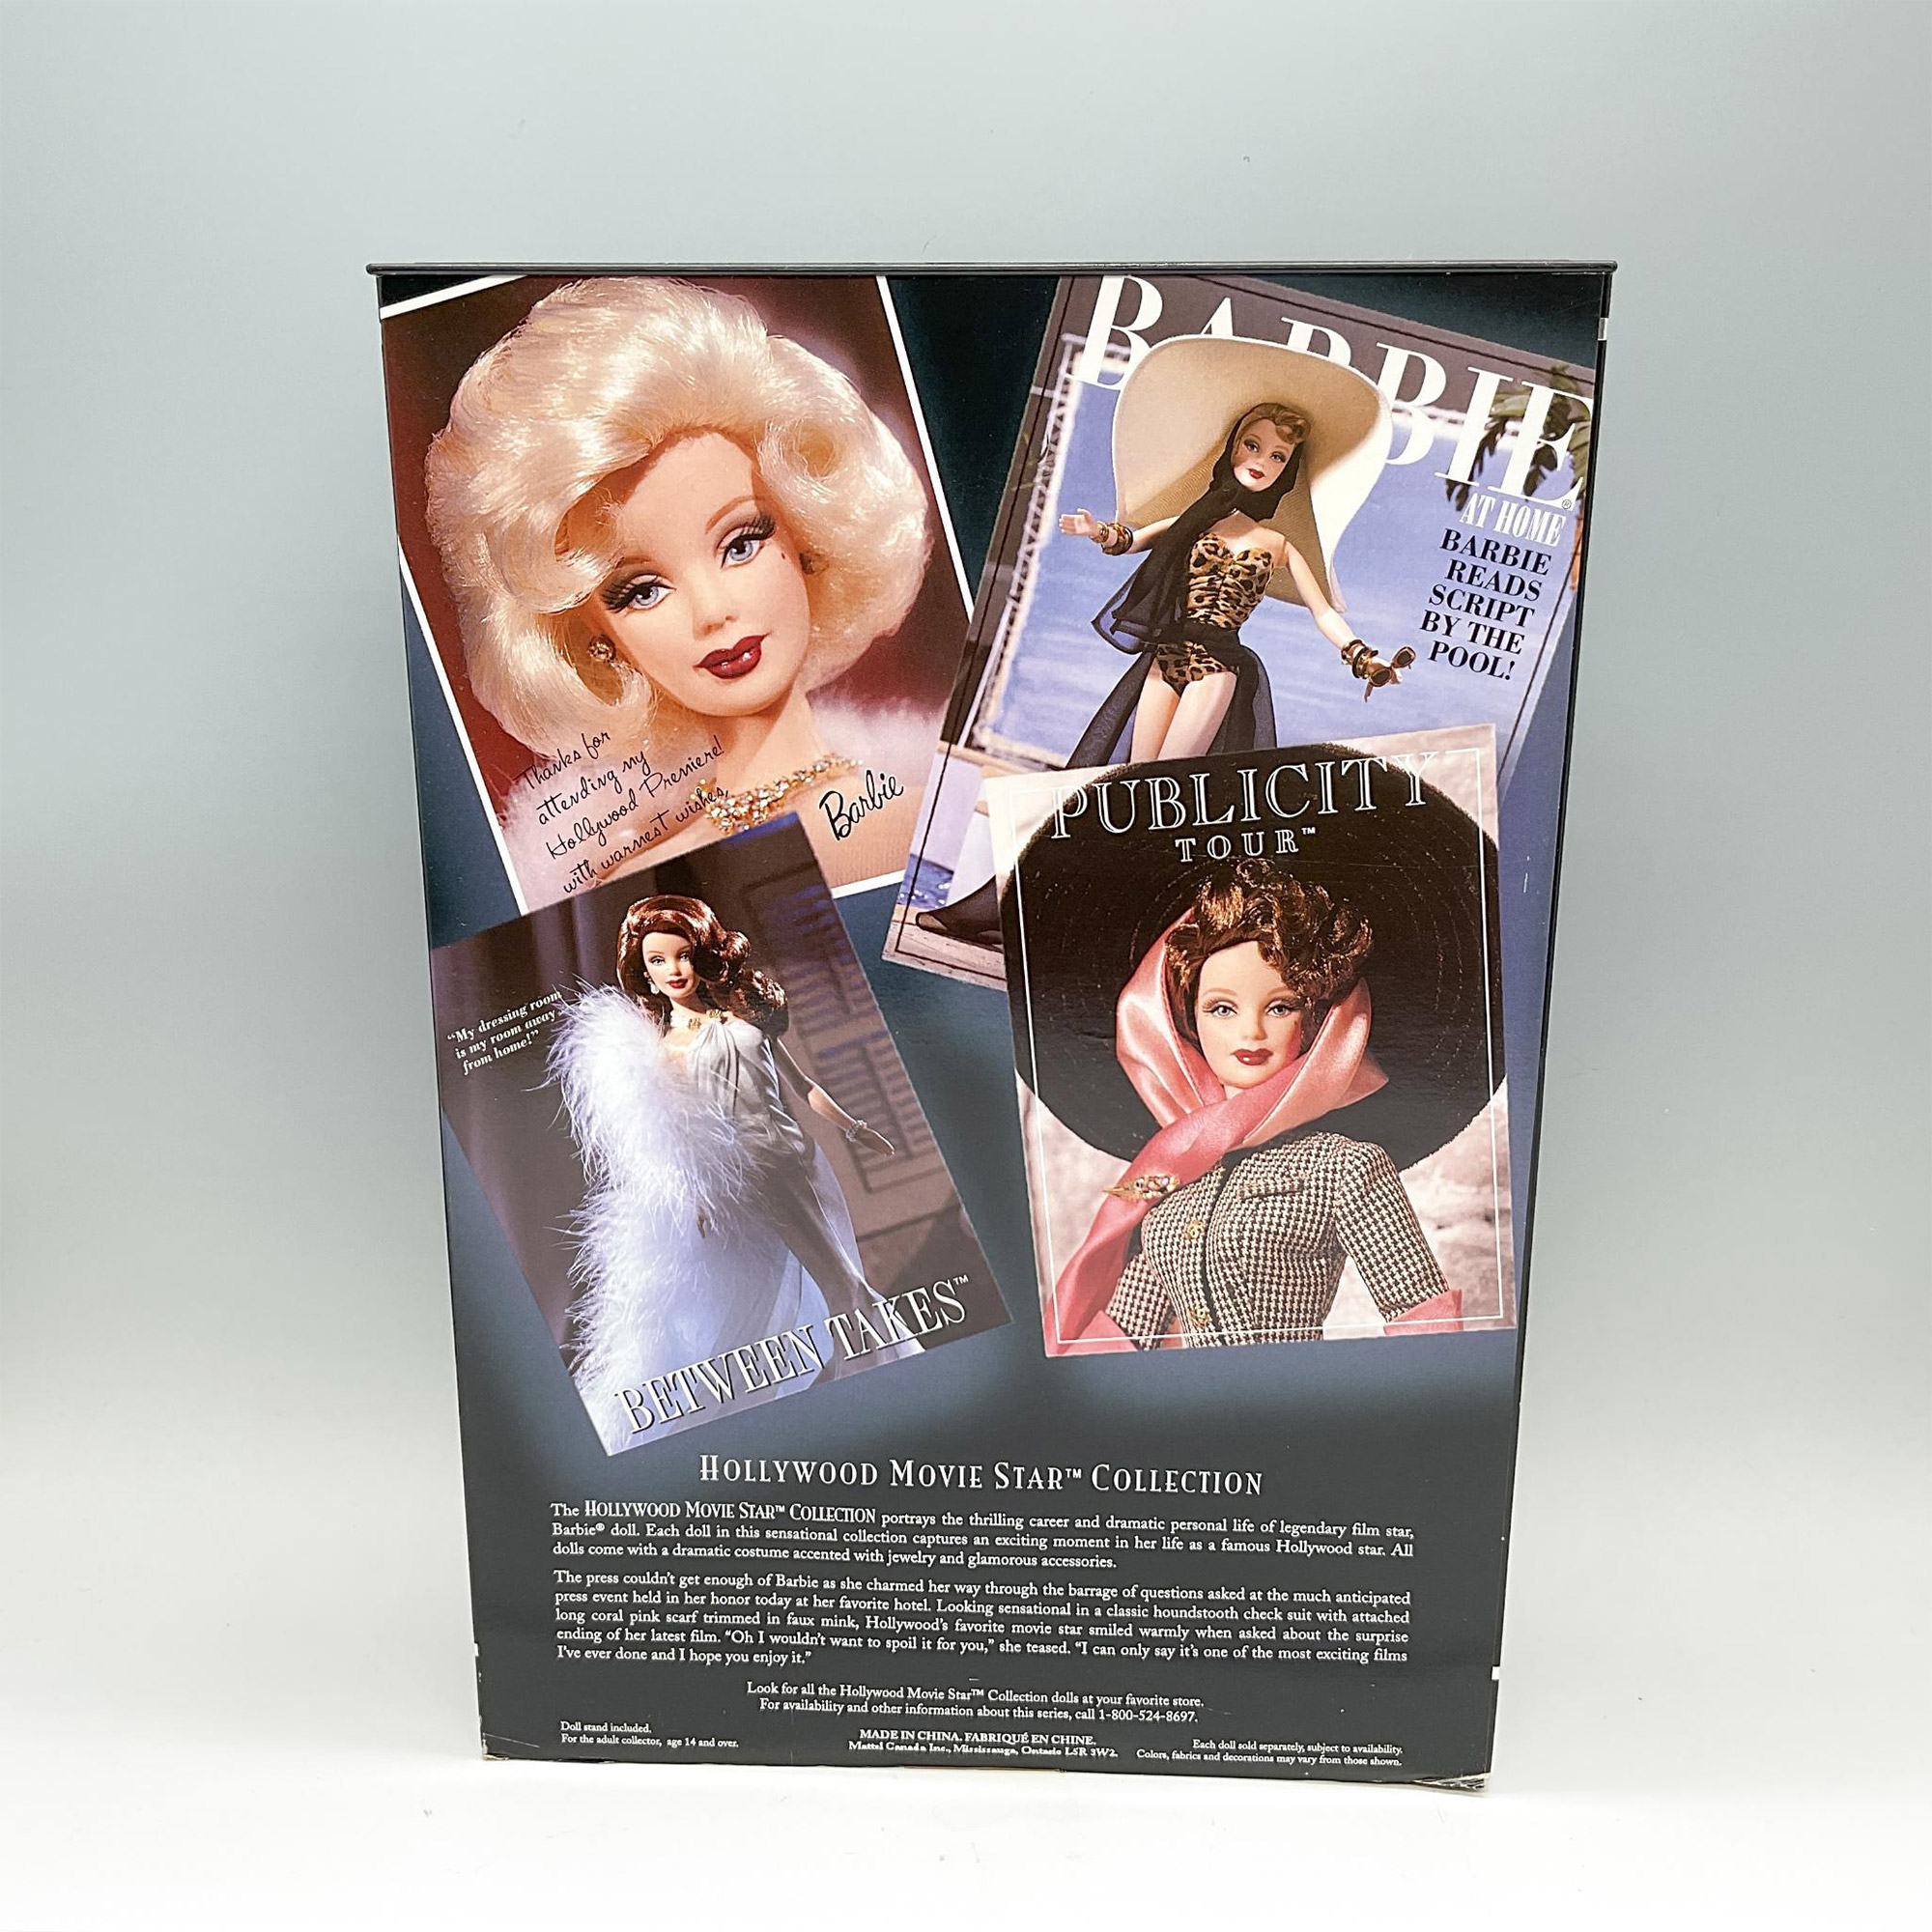 Mattel Collector Edition Barbie Doll, Publicity Tour - Image 2 of 3